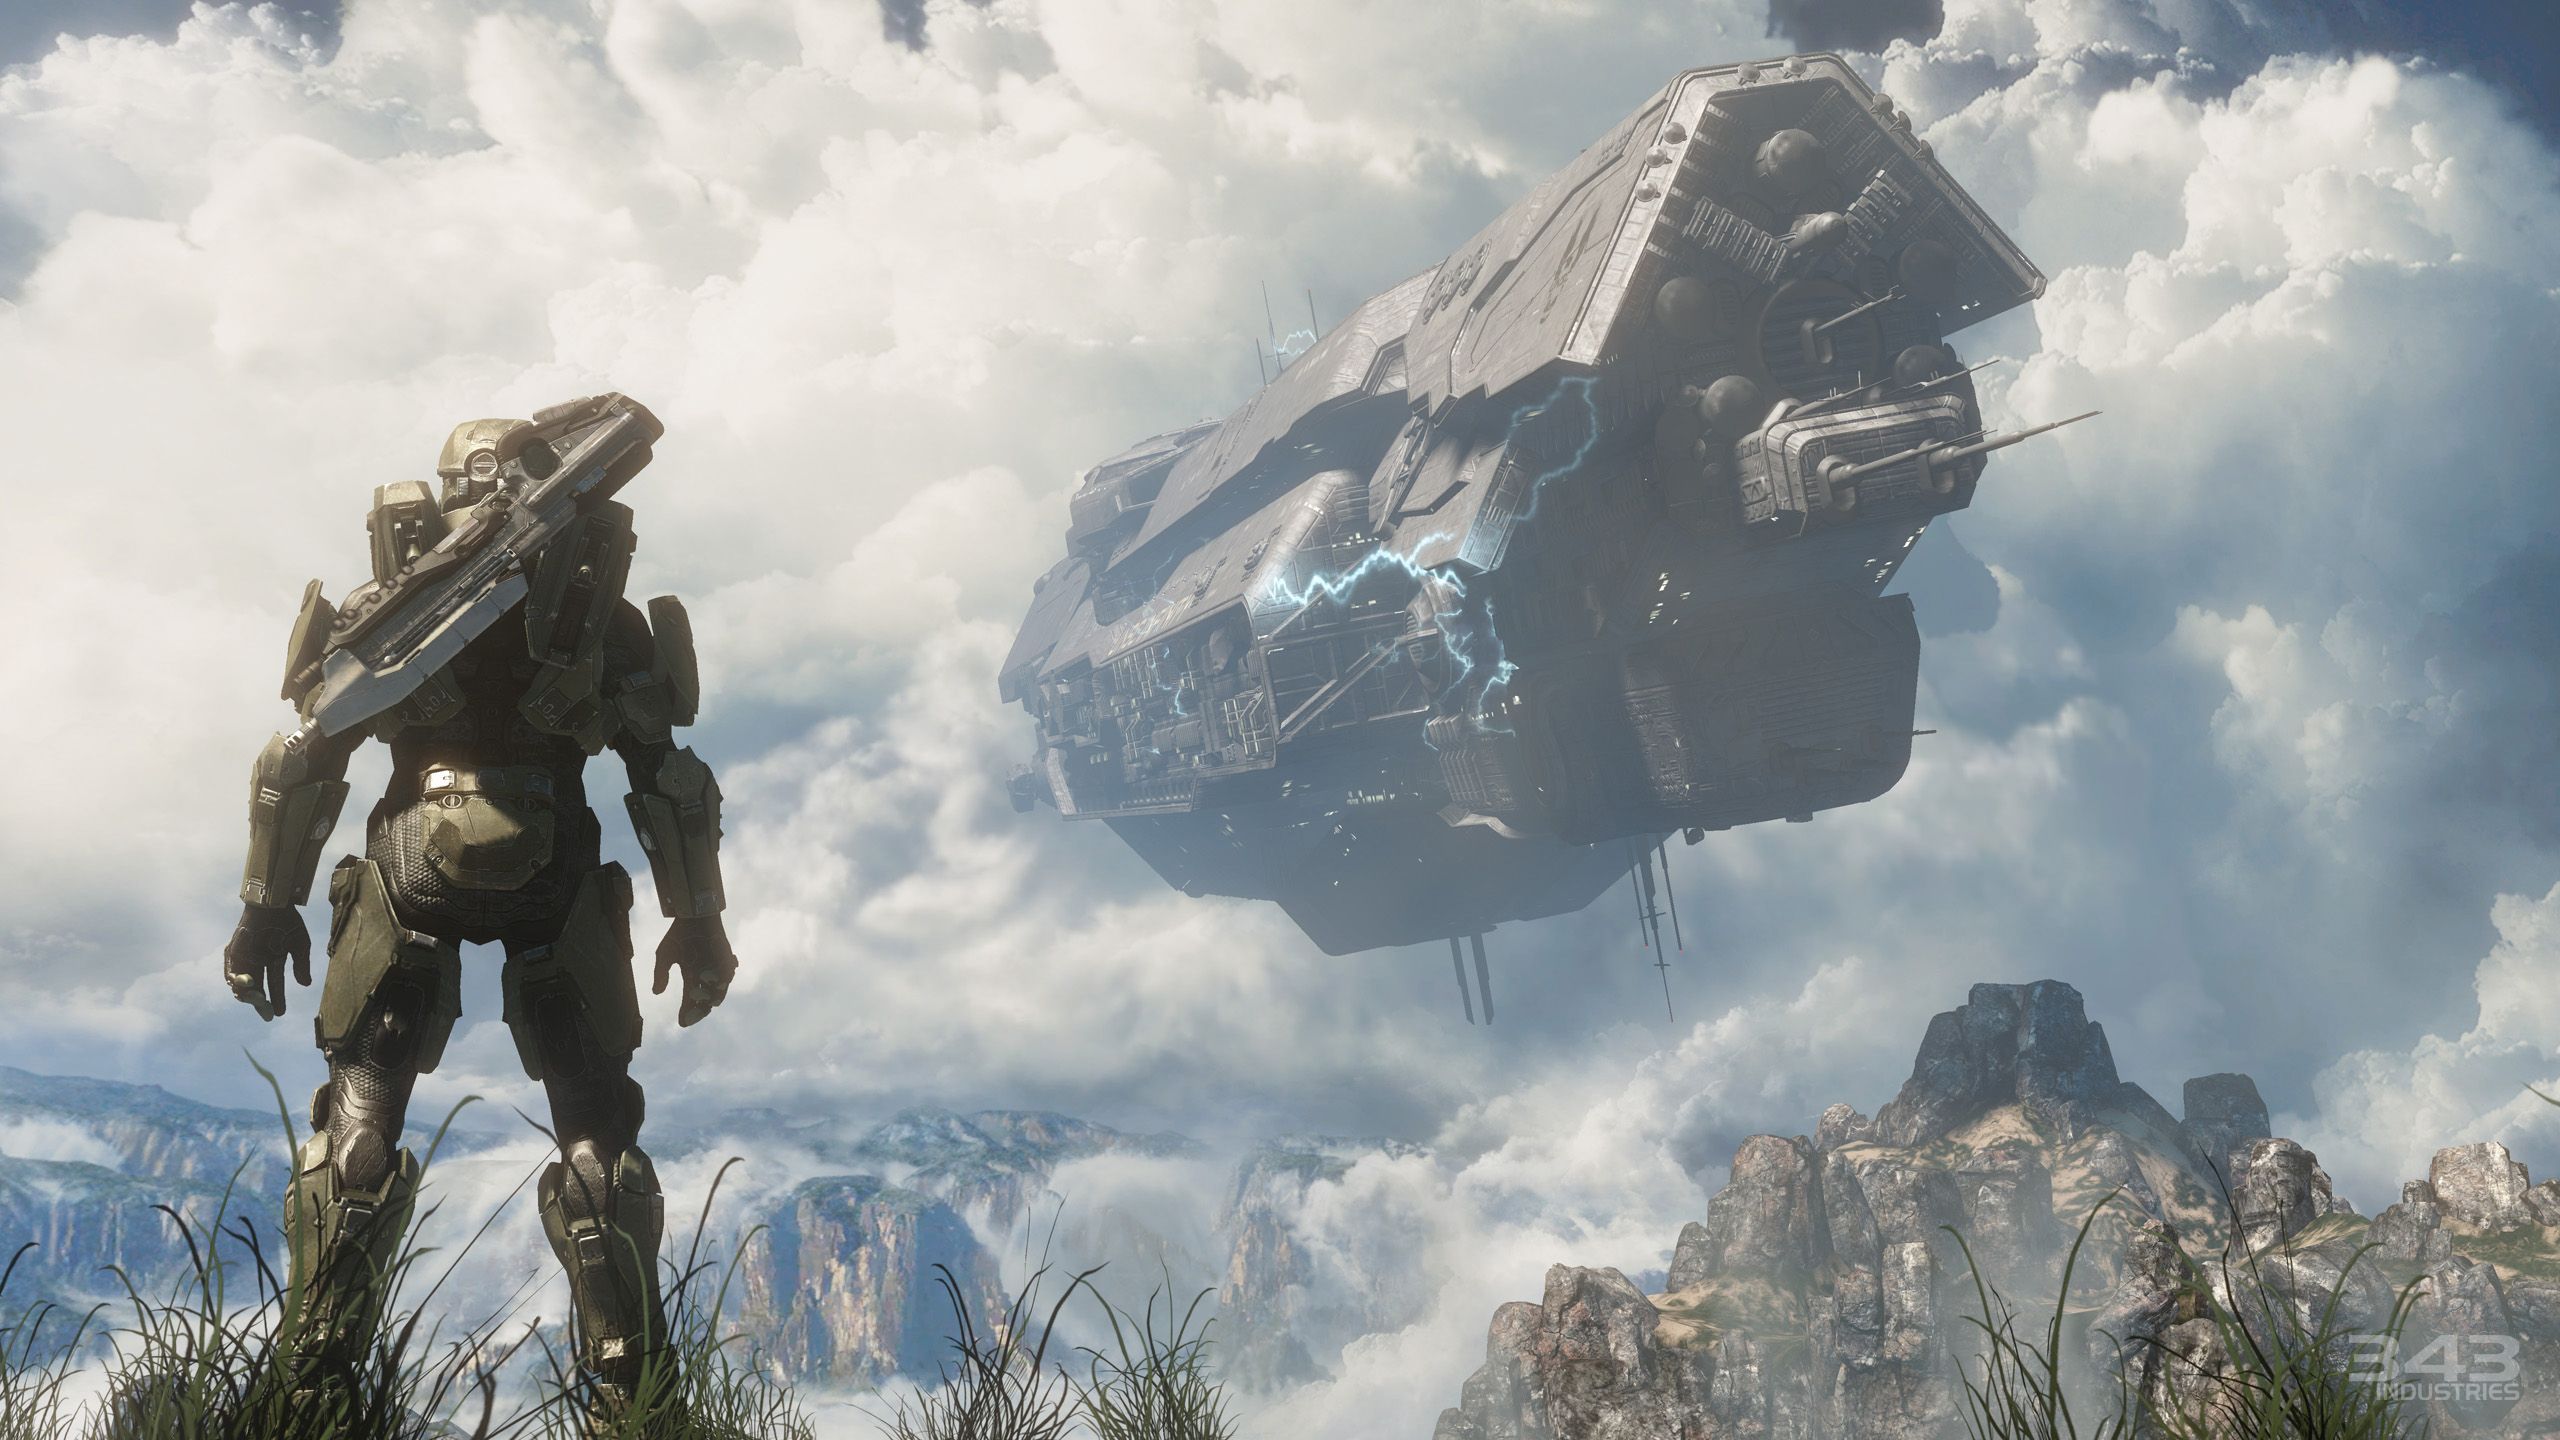 Rumor Mill: Halo Infinite Costs More Than $500 Million To Develop